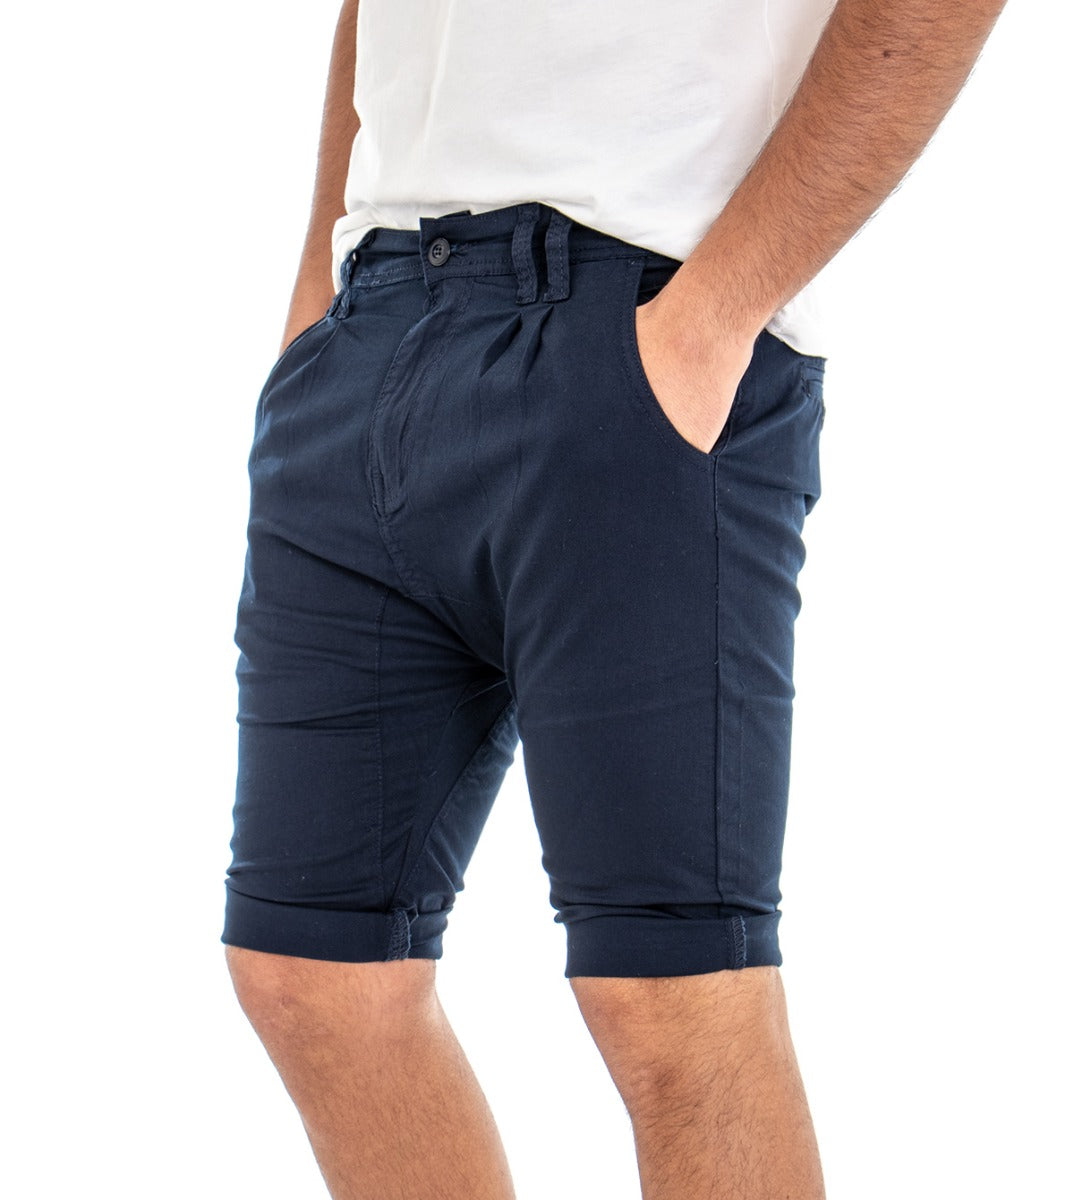 Bermuda Short Men's Shorts Blue Pence Solid Color Low Crotch GIOSAL-PC1305A